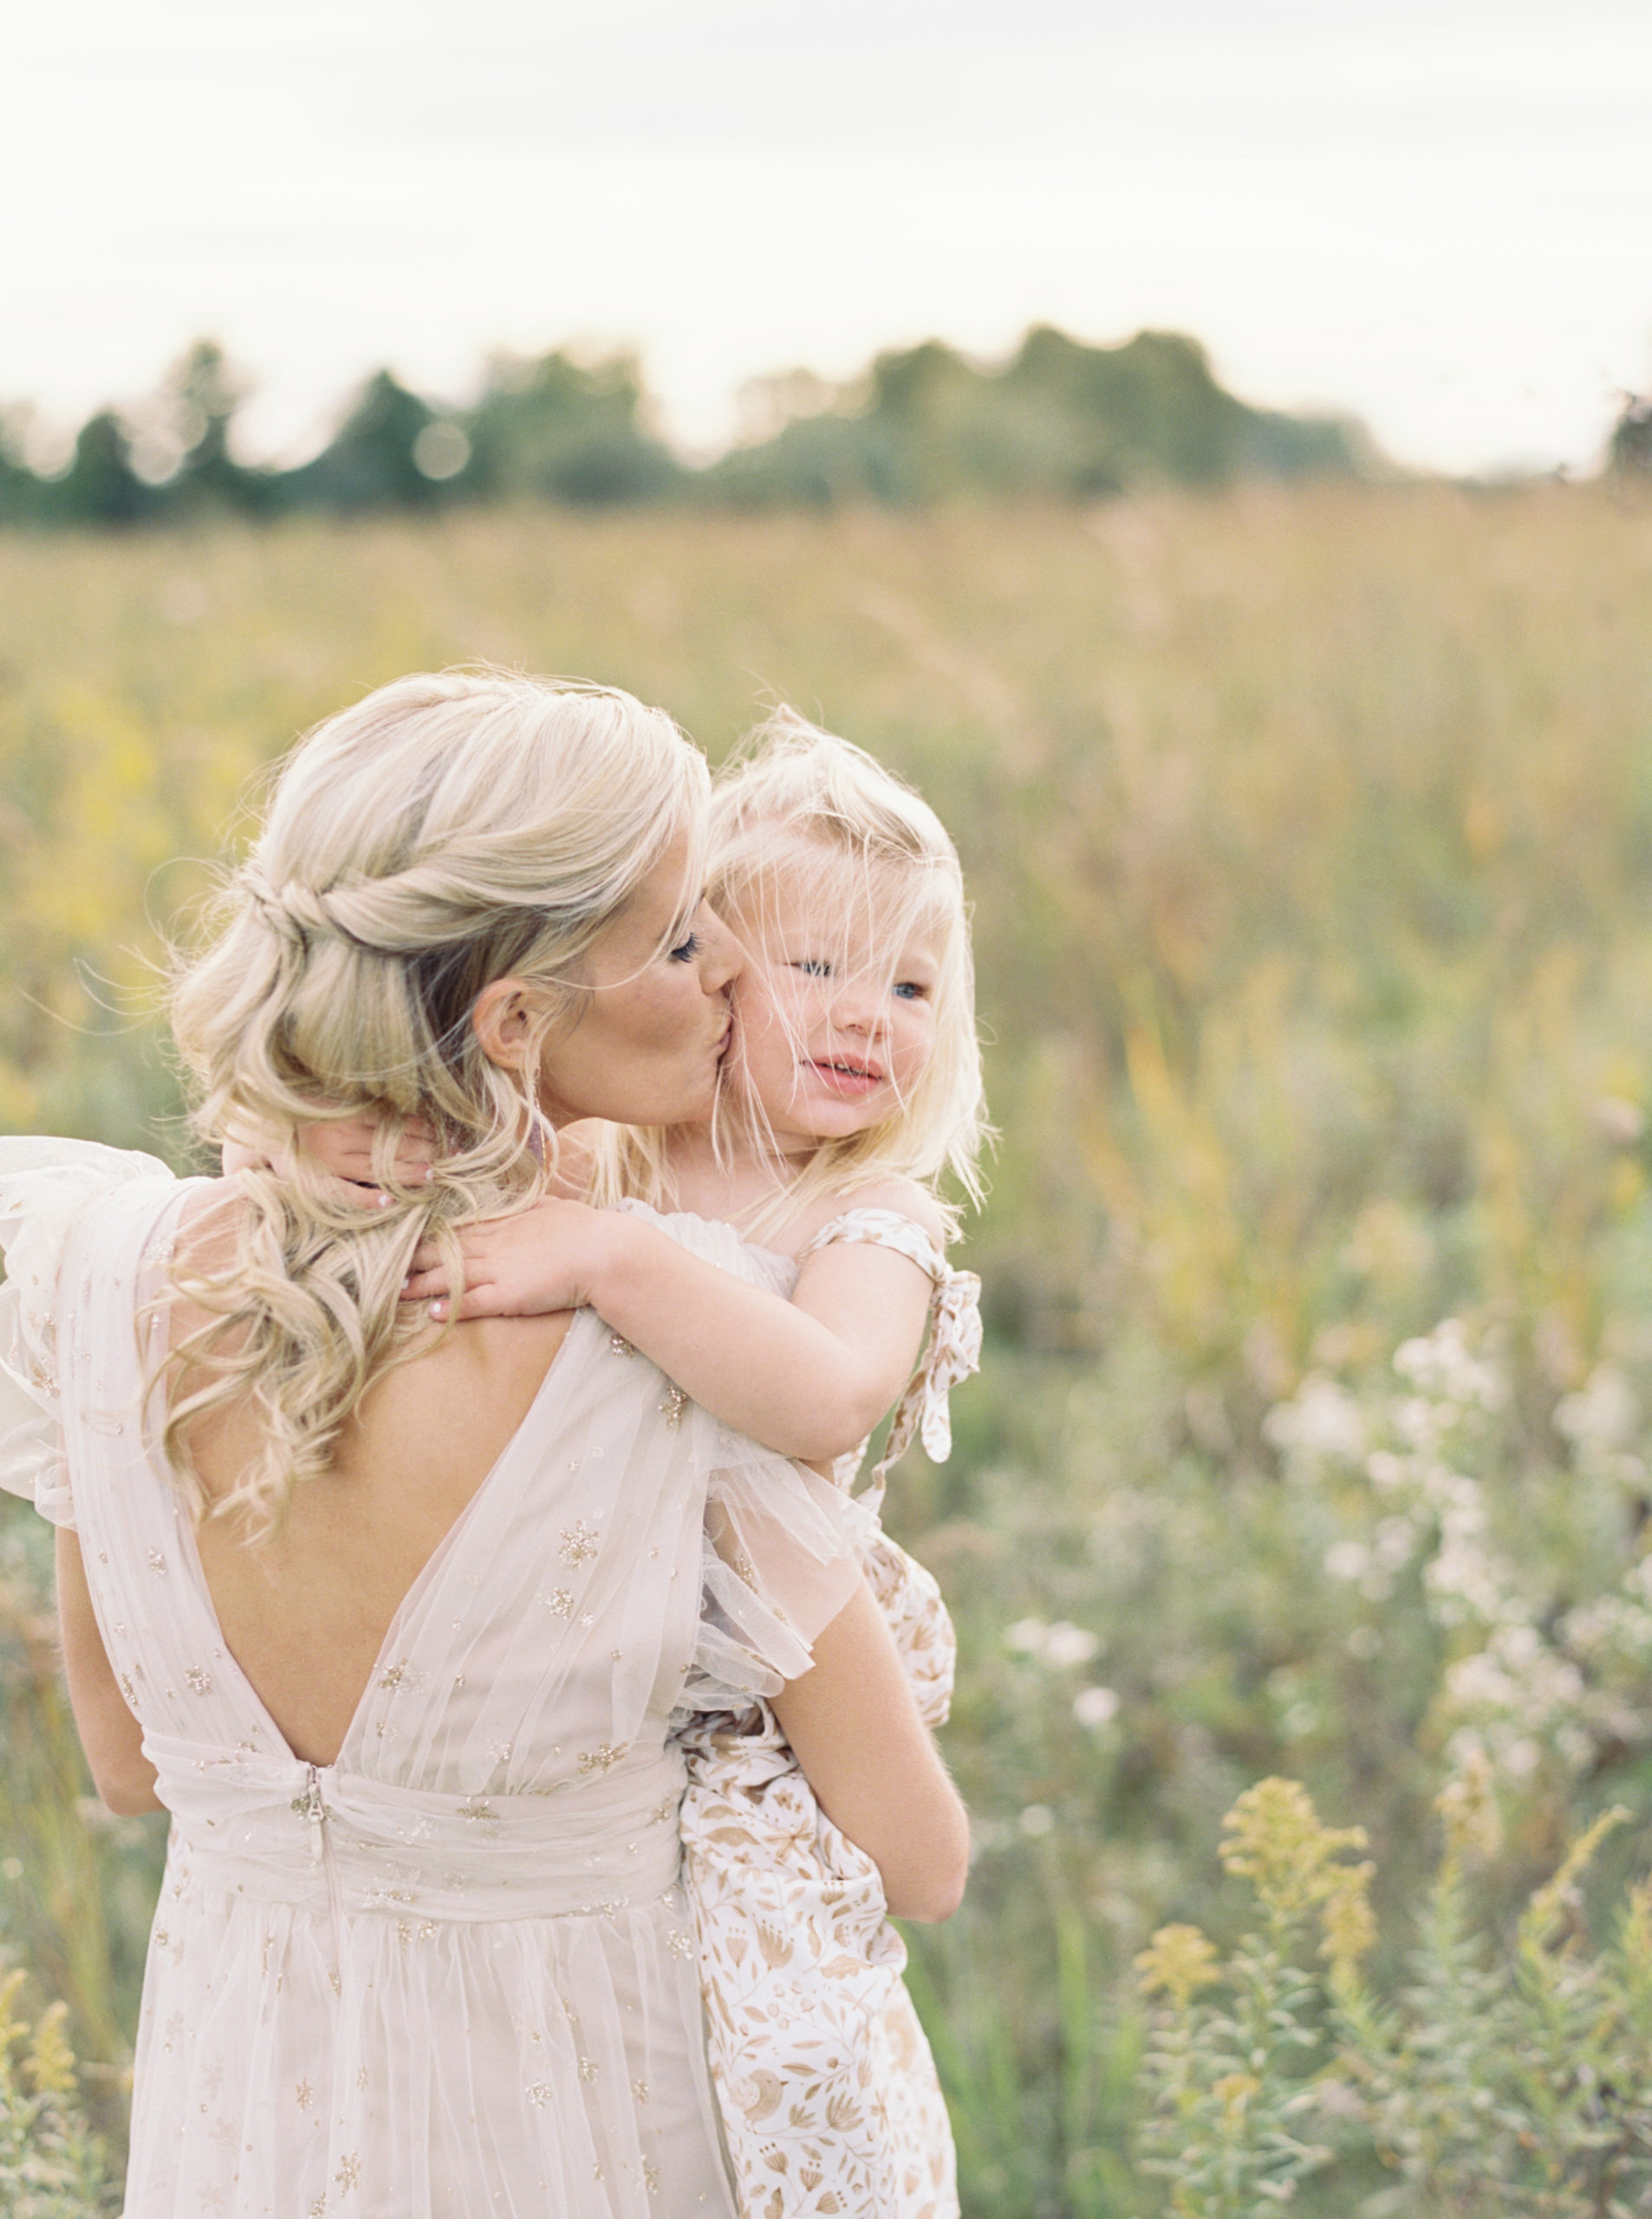 Mother and daughter cuddle and kiss in middleton grassy field